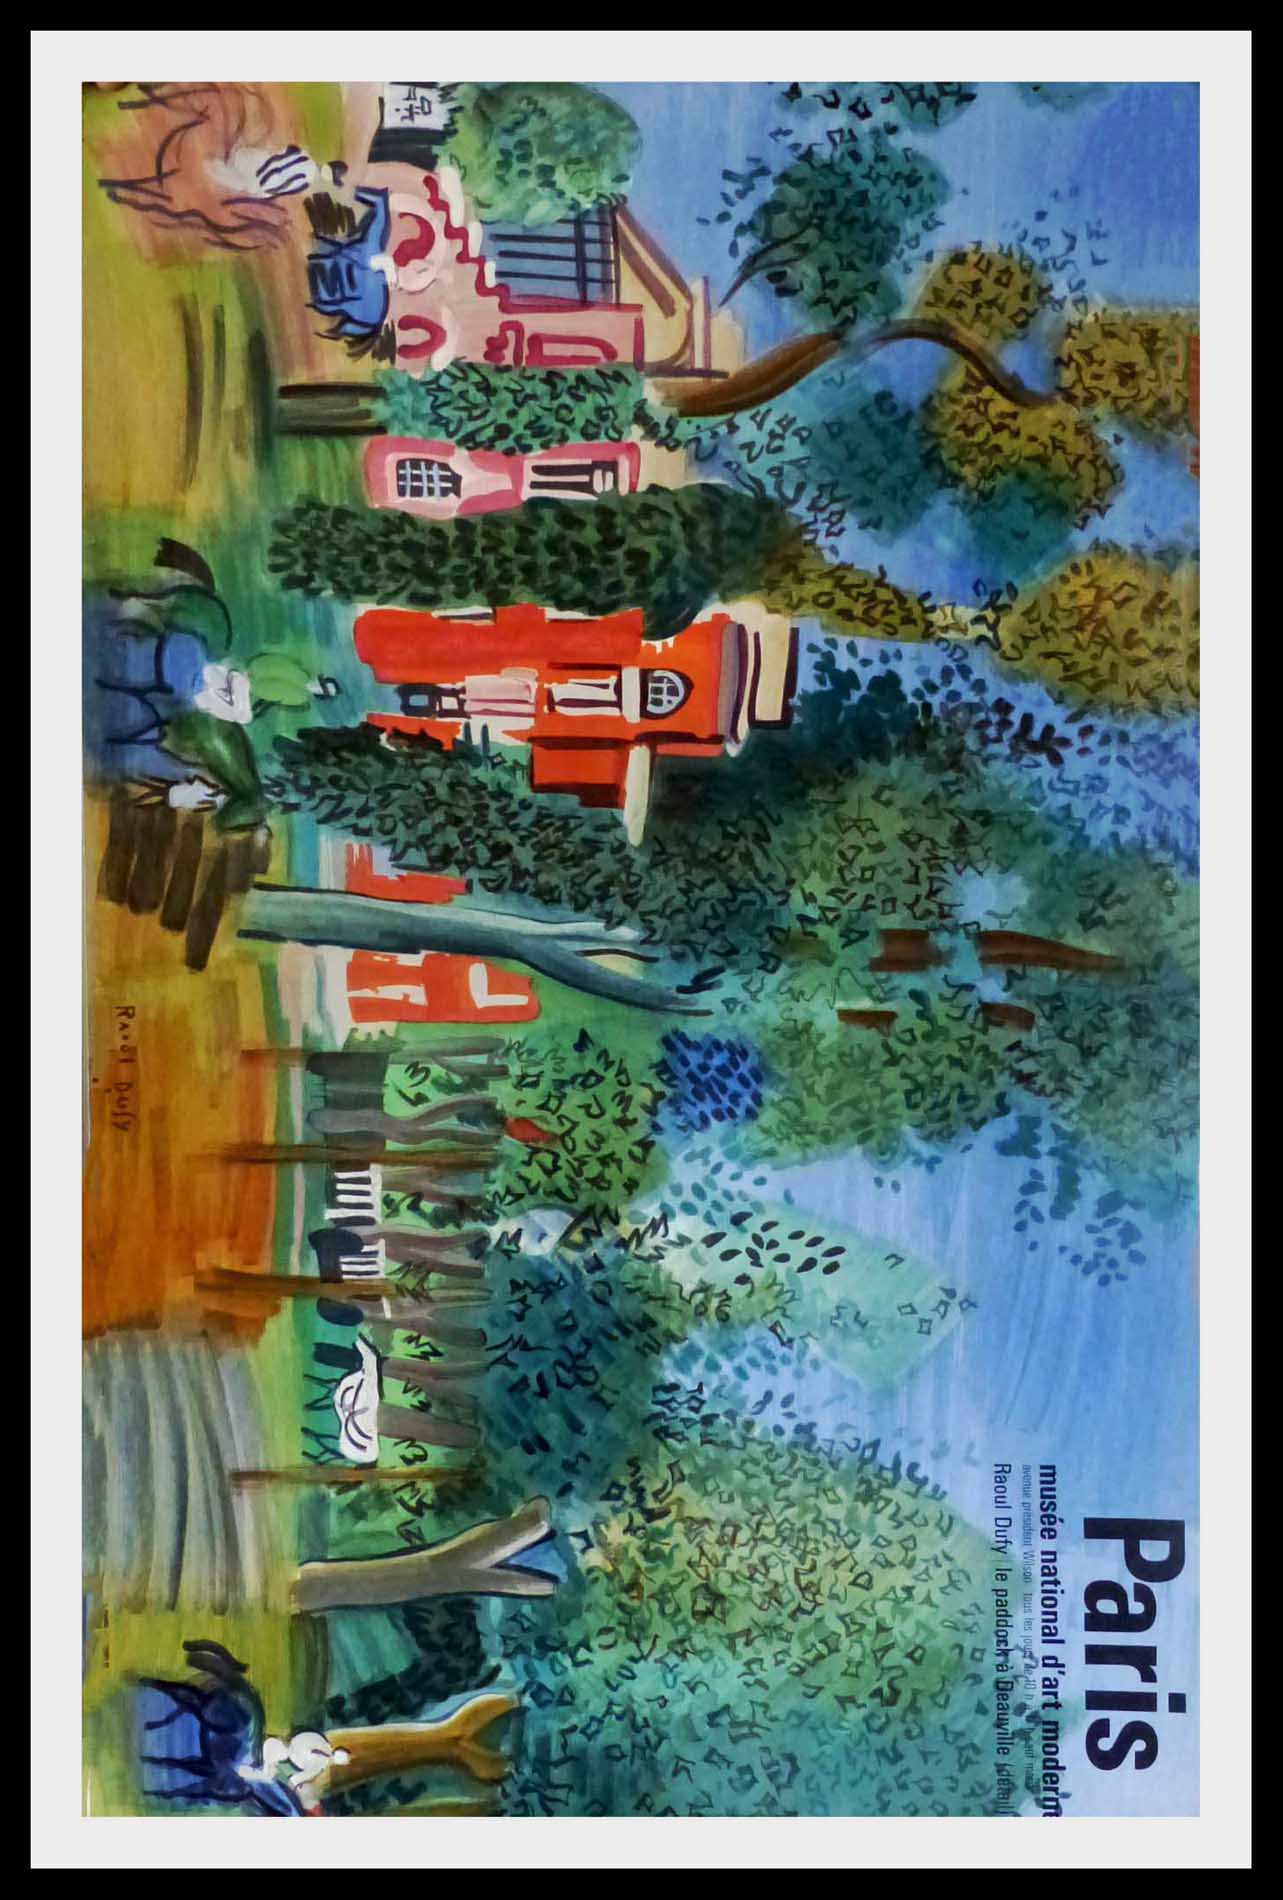 (alt="original vintage travel poster, le paddock at Deauville, Raoul DUFY signed in the plate, printed by Mourlot Paris, 1960")